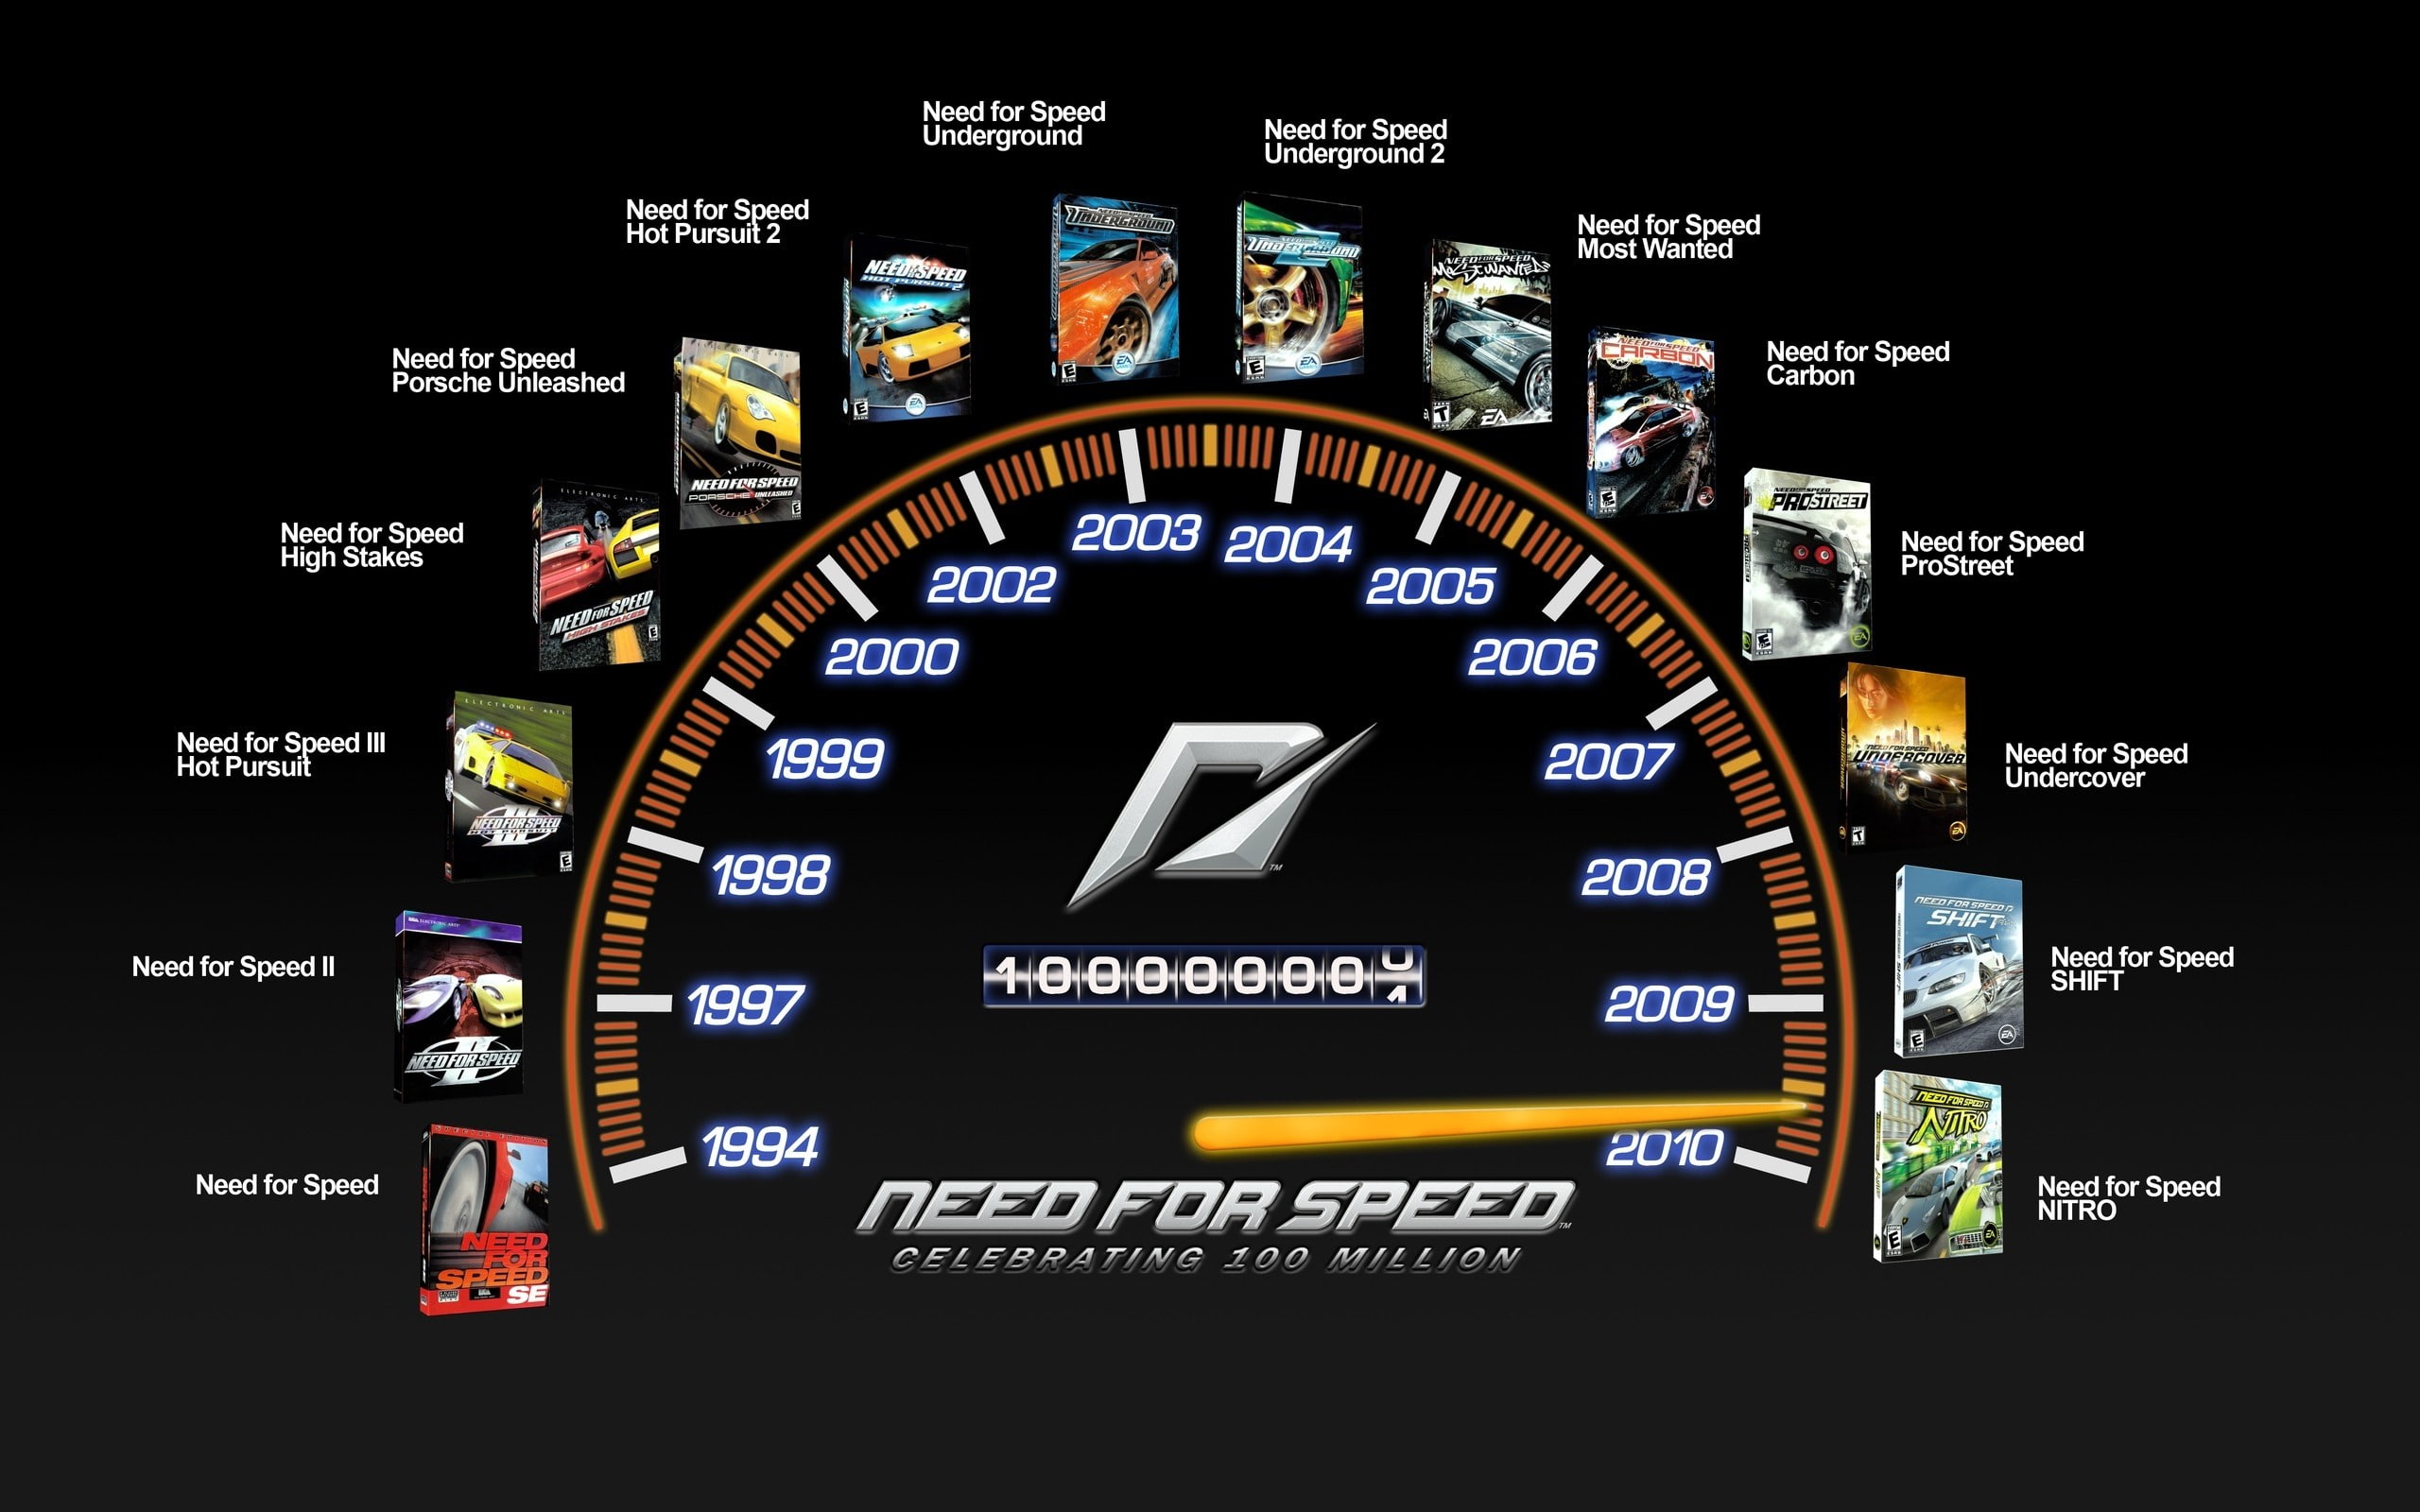 Nfs, Need for speed, Hot pursuit, High stakes, Porsche unleashed